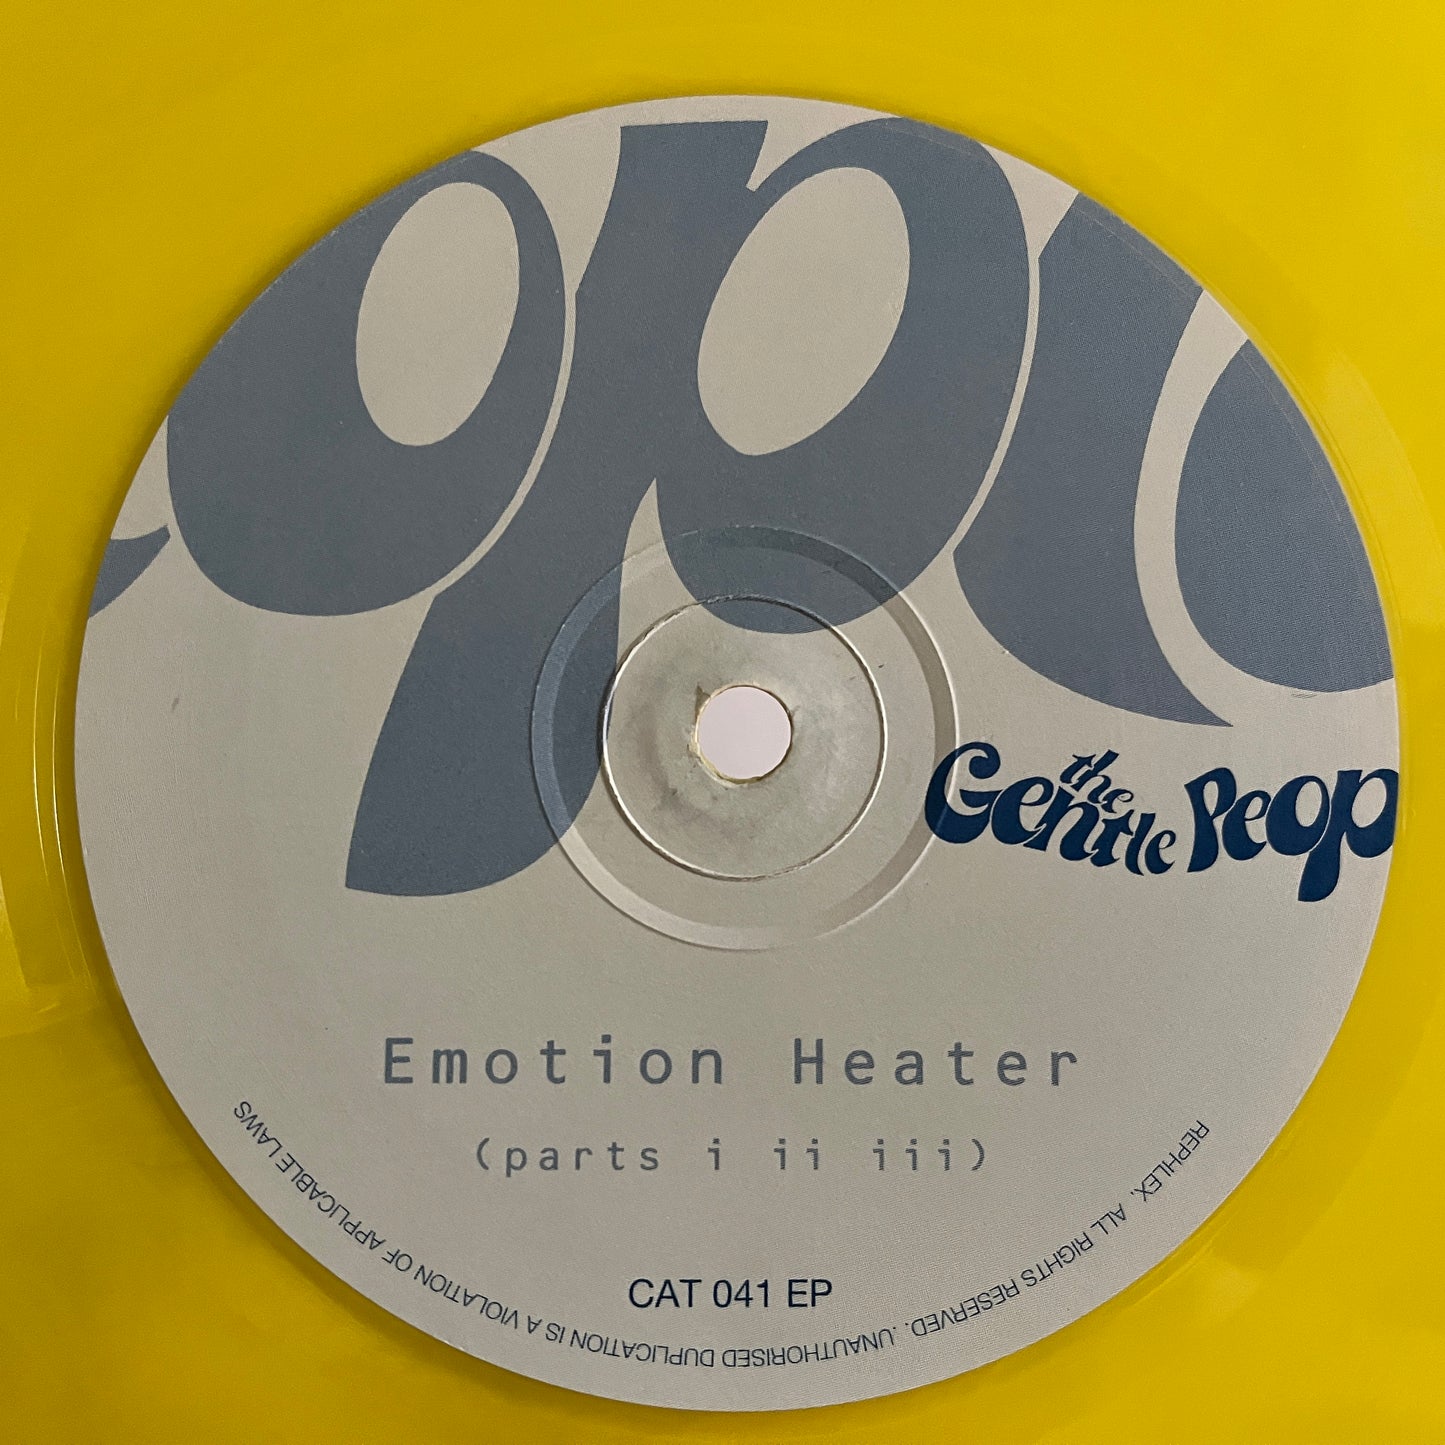 The Gentle People – Emotion Heater